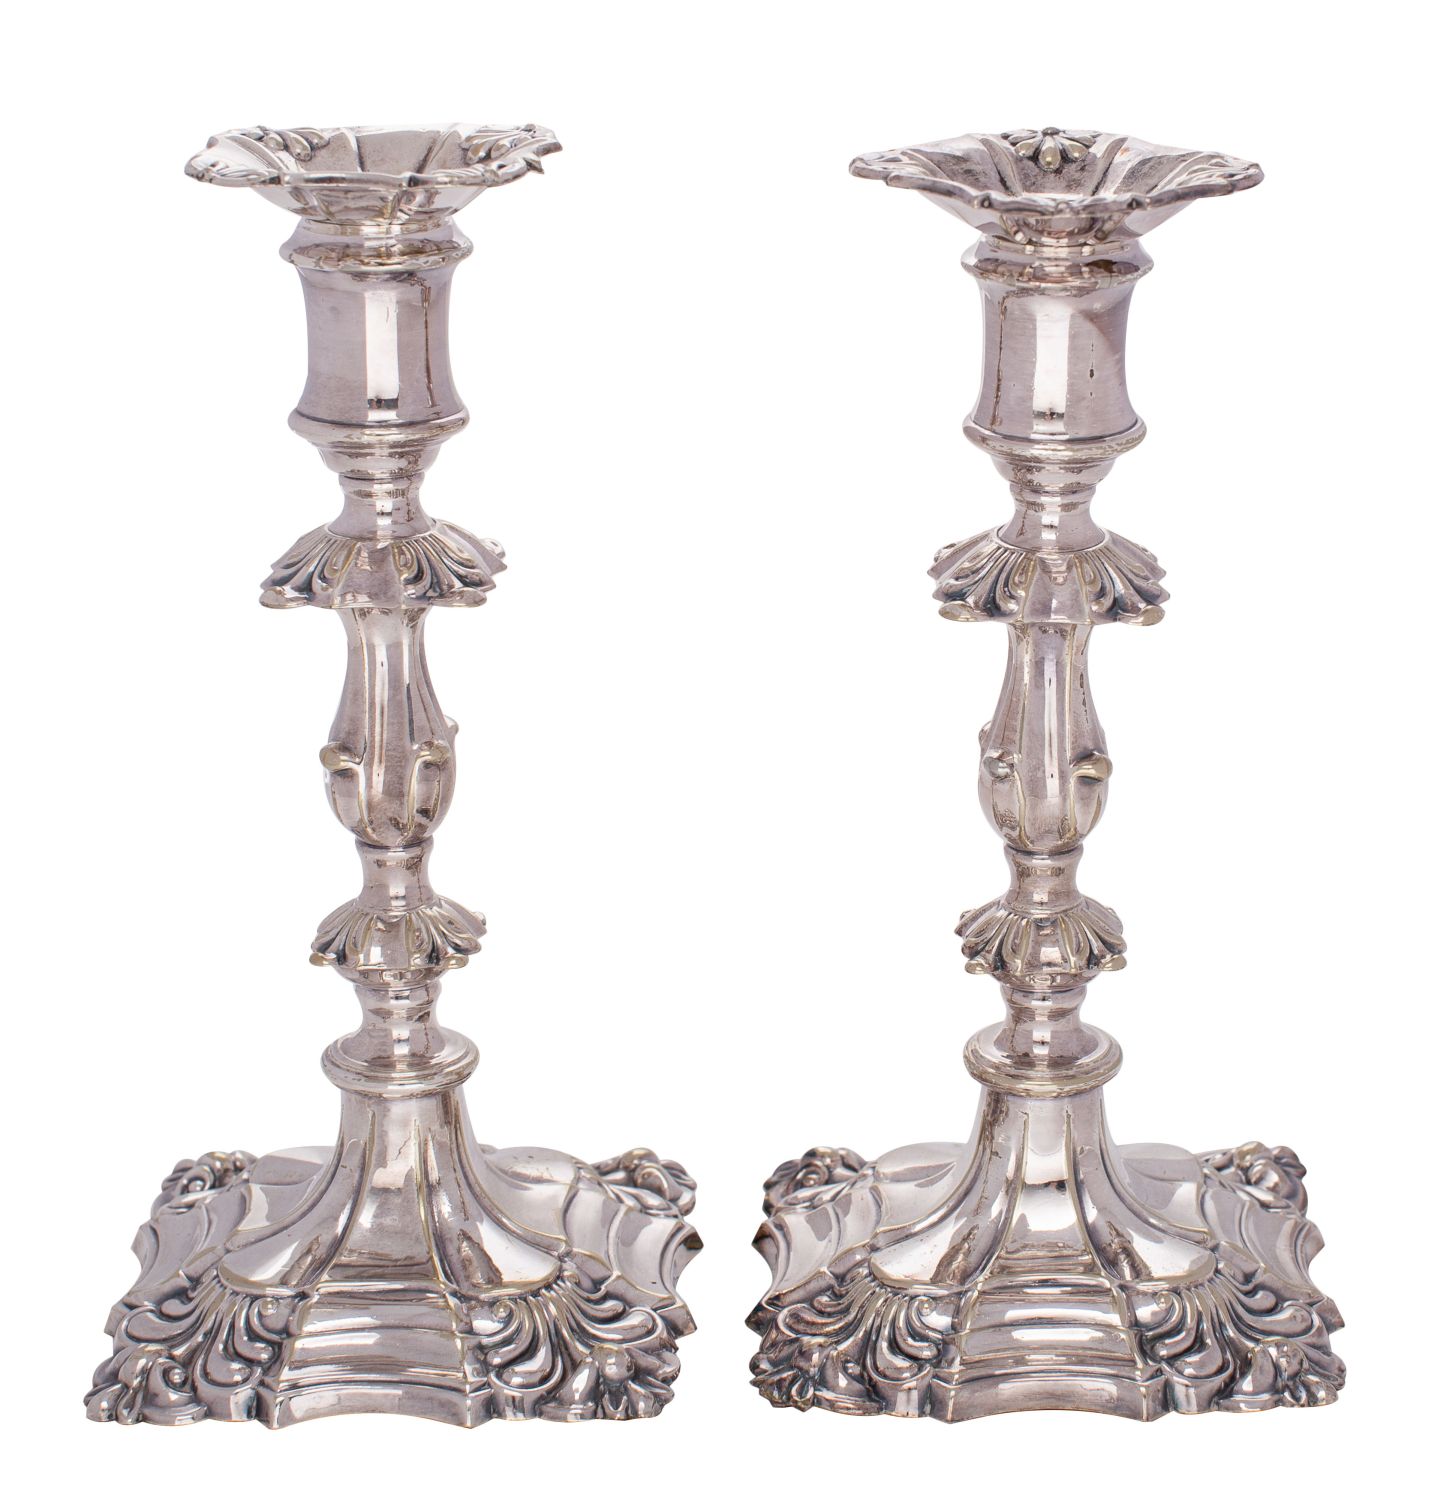 A pair of plated candlesticks in the George II taste with anthemion decoration and knopped stems, - Image 2 of 2